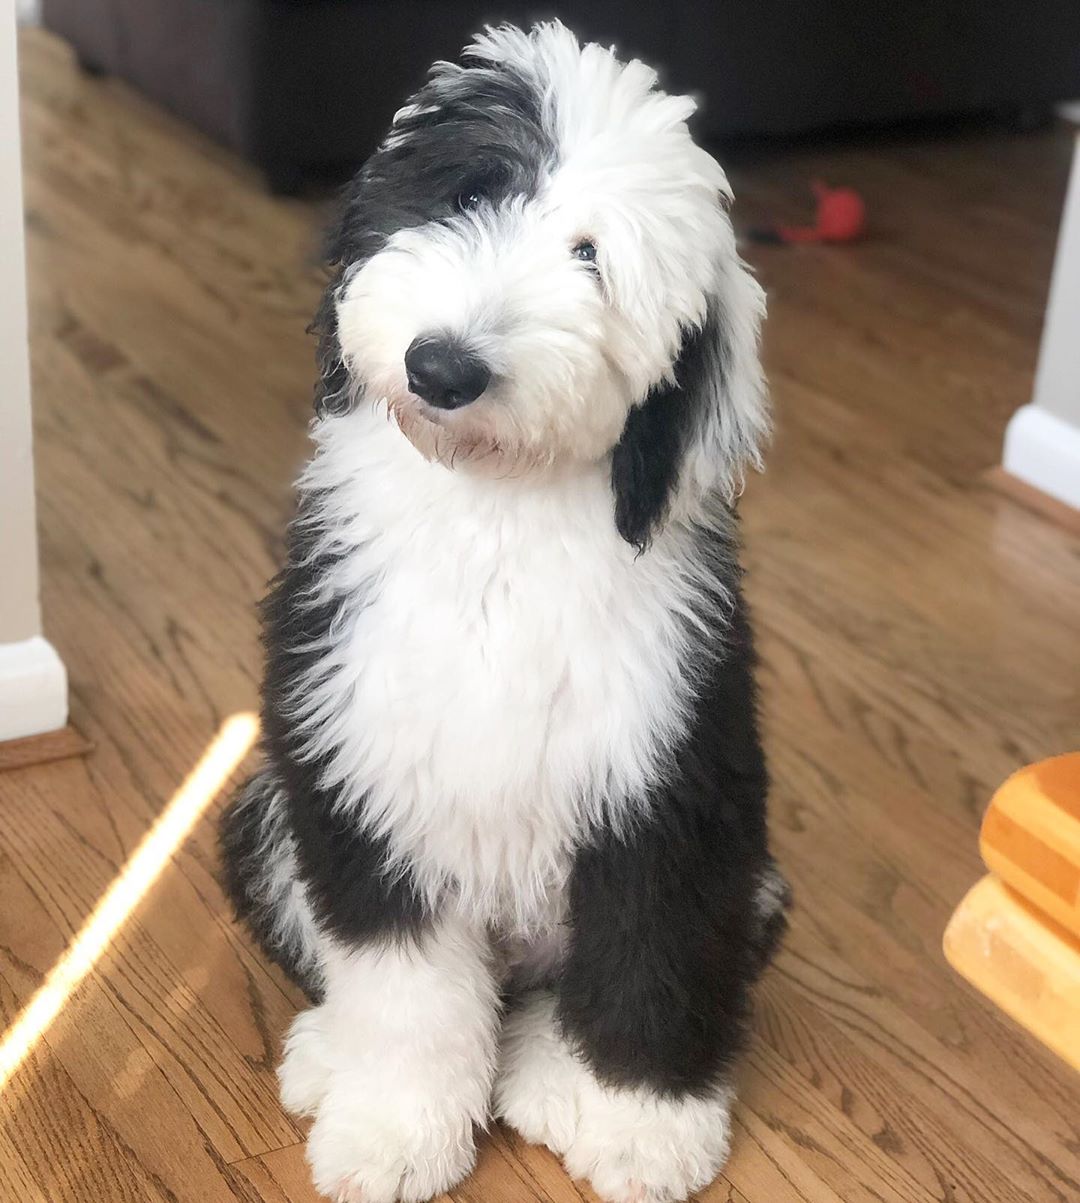 An Old English Sheepdog sitting on the floor with its sad face